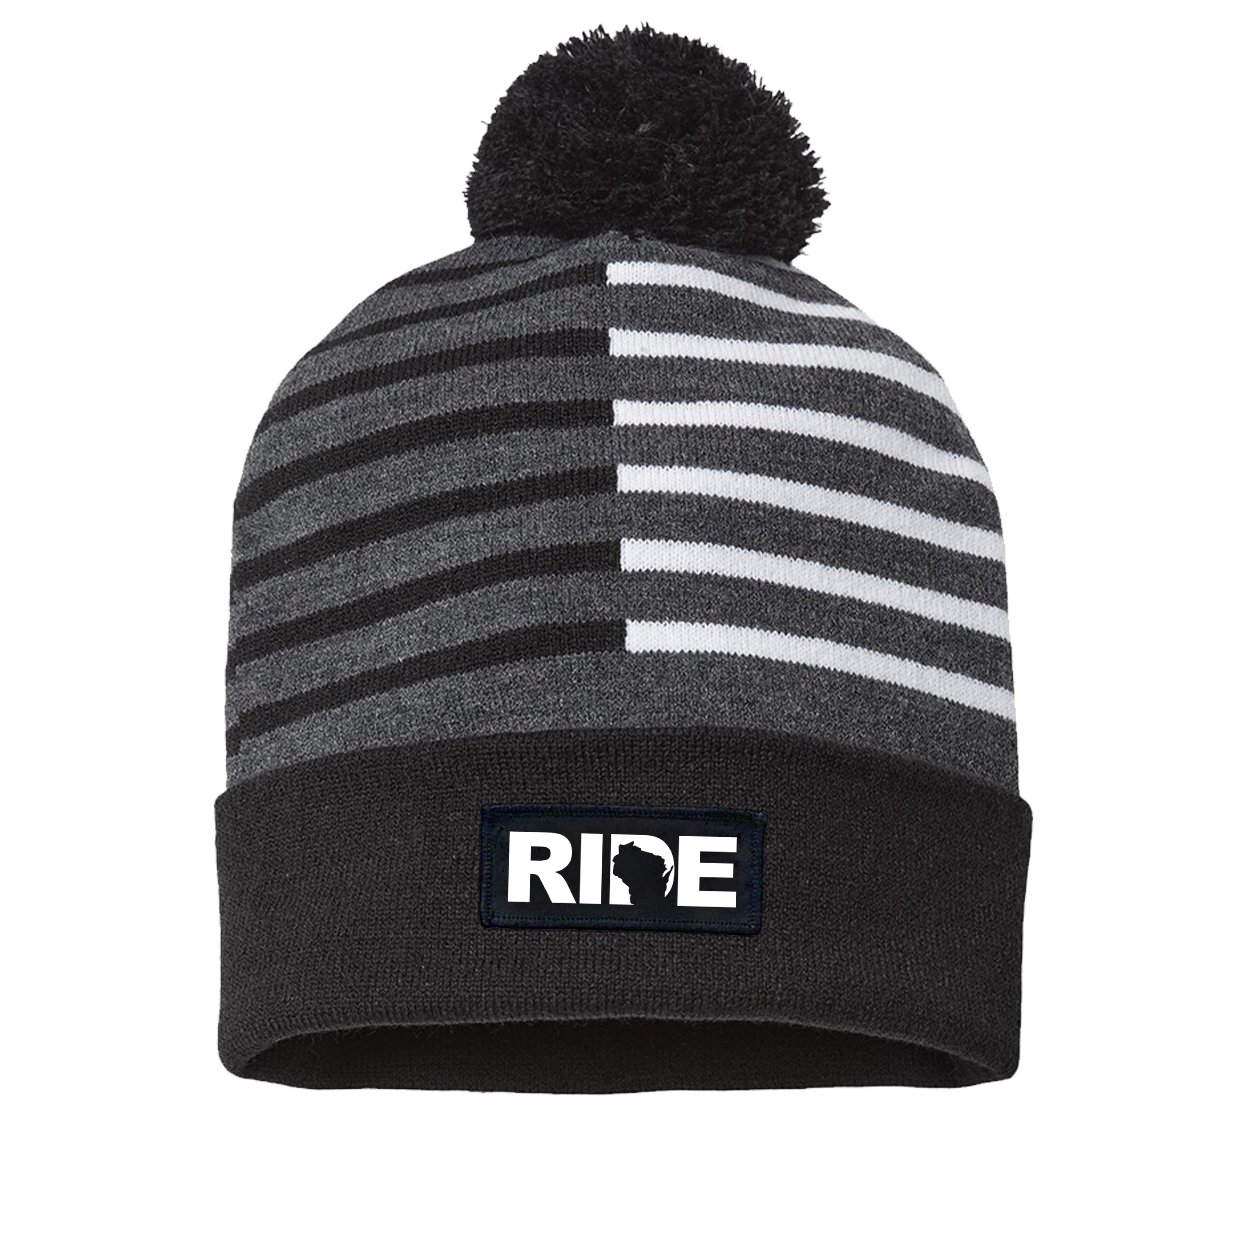 Ride Wisconsin Night Out Woven Patch Roll Up Pom Knit Beanie Half Color Black/White (White Logo)